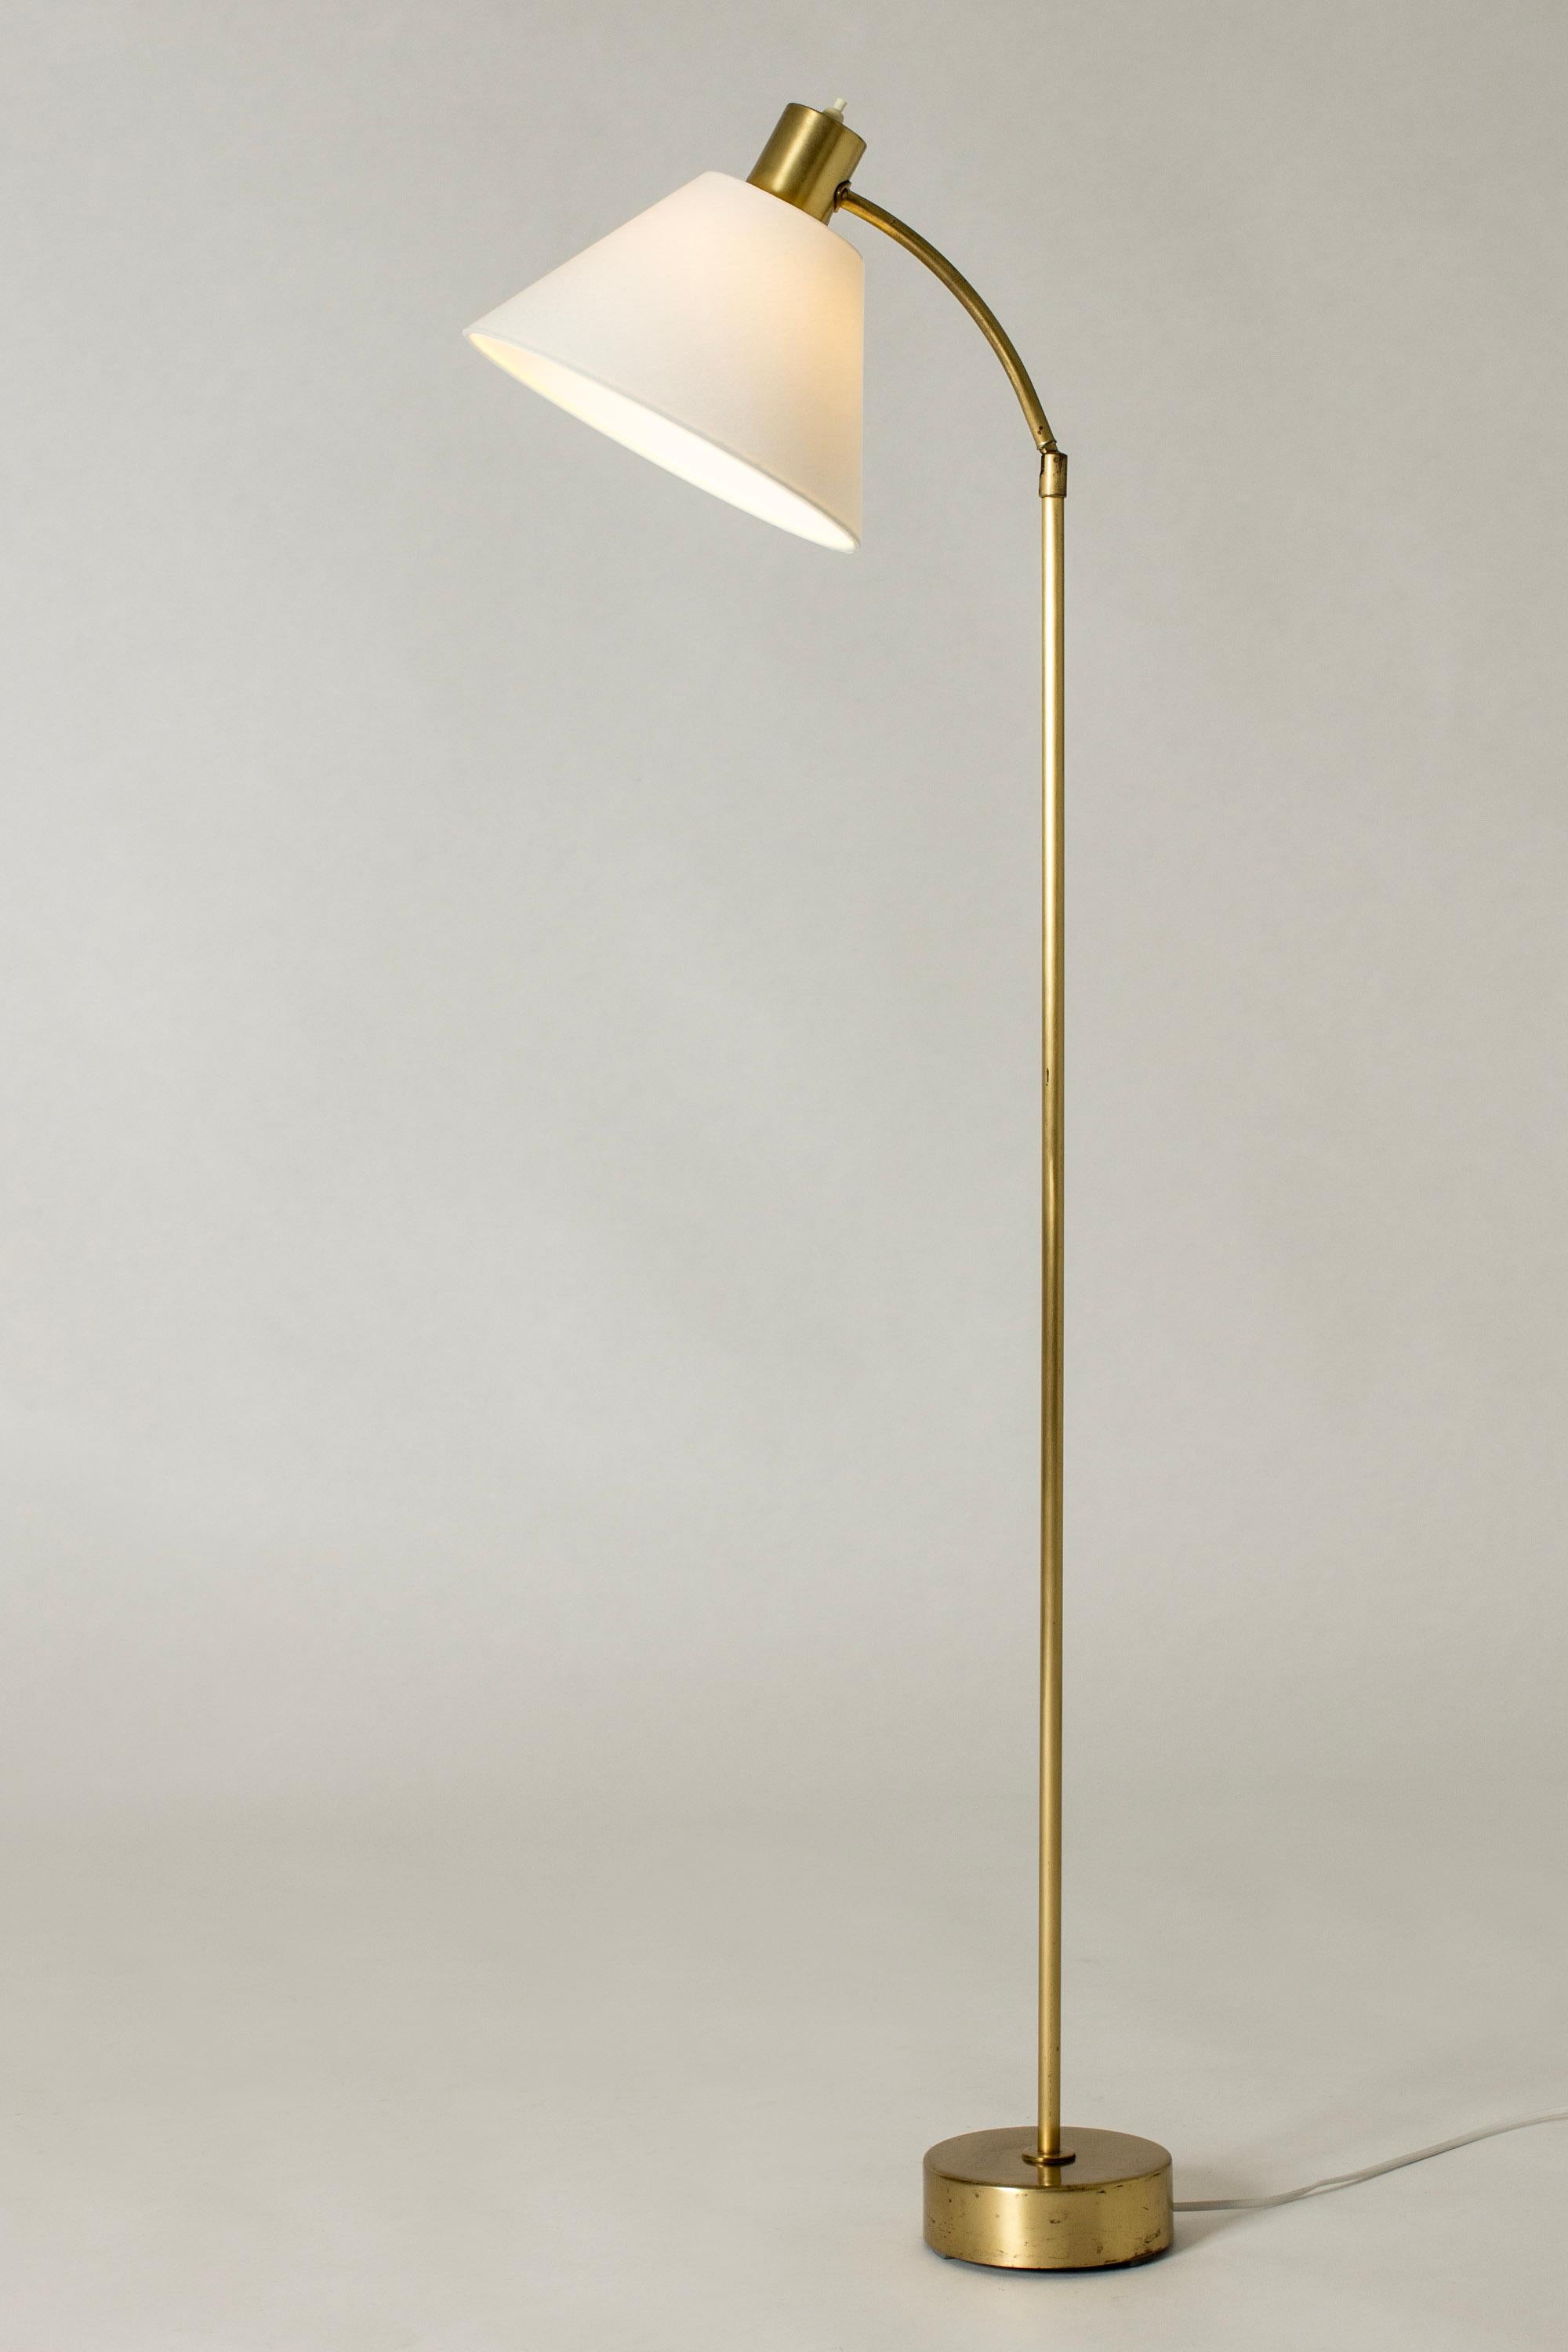 Cool brass floor lamp from Philips, in a neat size. Adjustable neck.